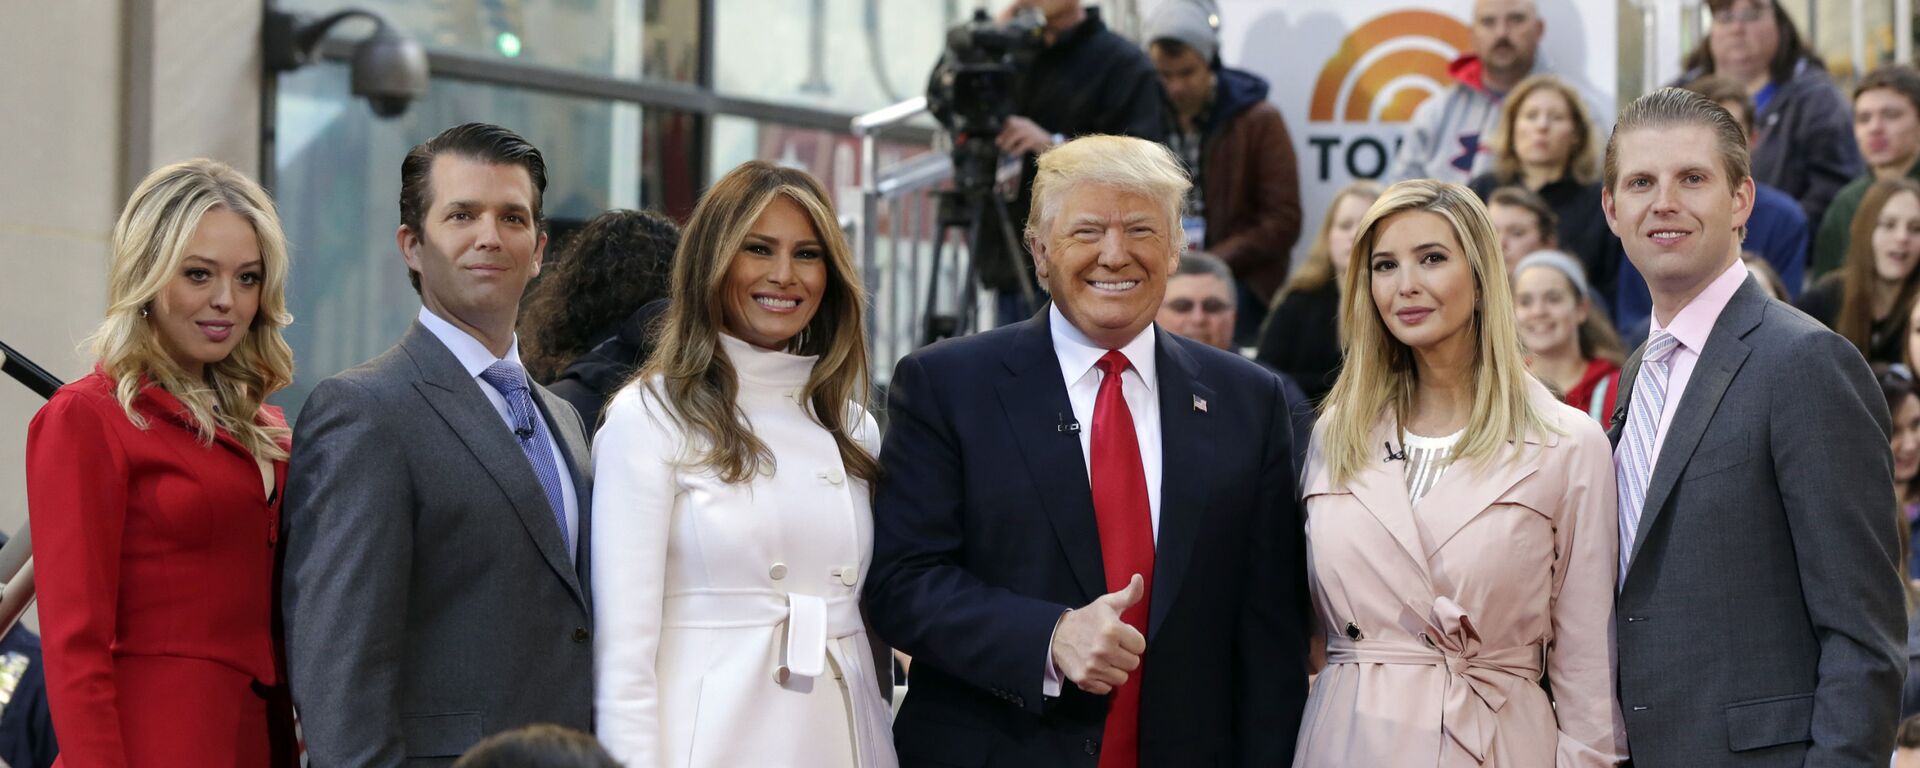 Republican presidential candidate Donald Trump, fourth from left, poses for a photo with family members on the NBC Today television program, in New York, Thursday, April 21, 2016. From left are: daughter Tiffany Trump, son Donald Trump Jr., his wife Melania Trump, daughter Ivanka Trump, and son Eric Trump. (AP Photo/Richard Drew) - Sputnik International, 1920, 24.06.2020